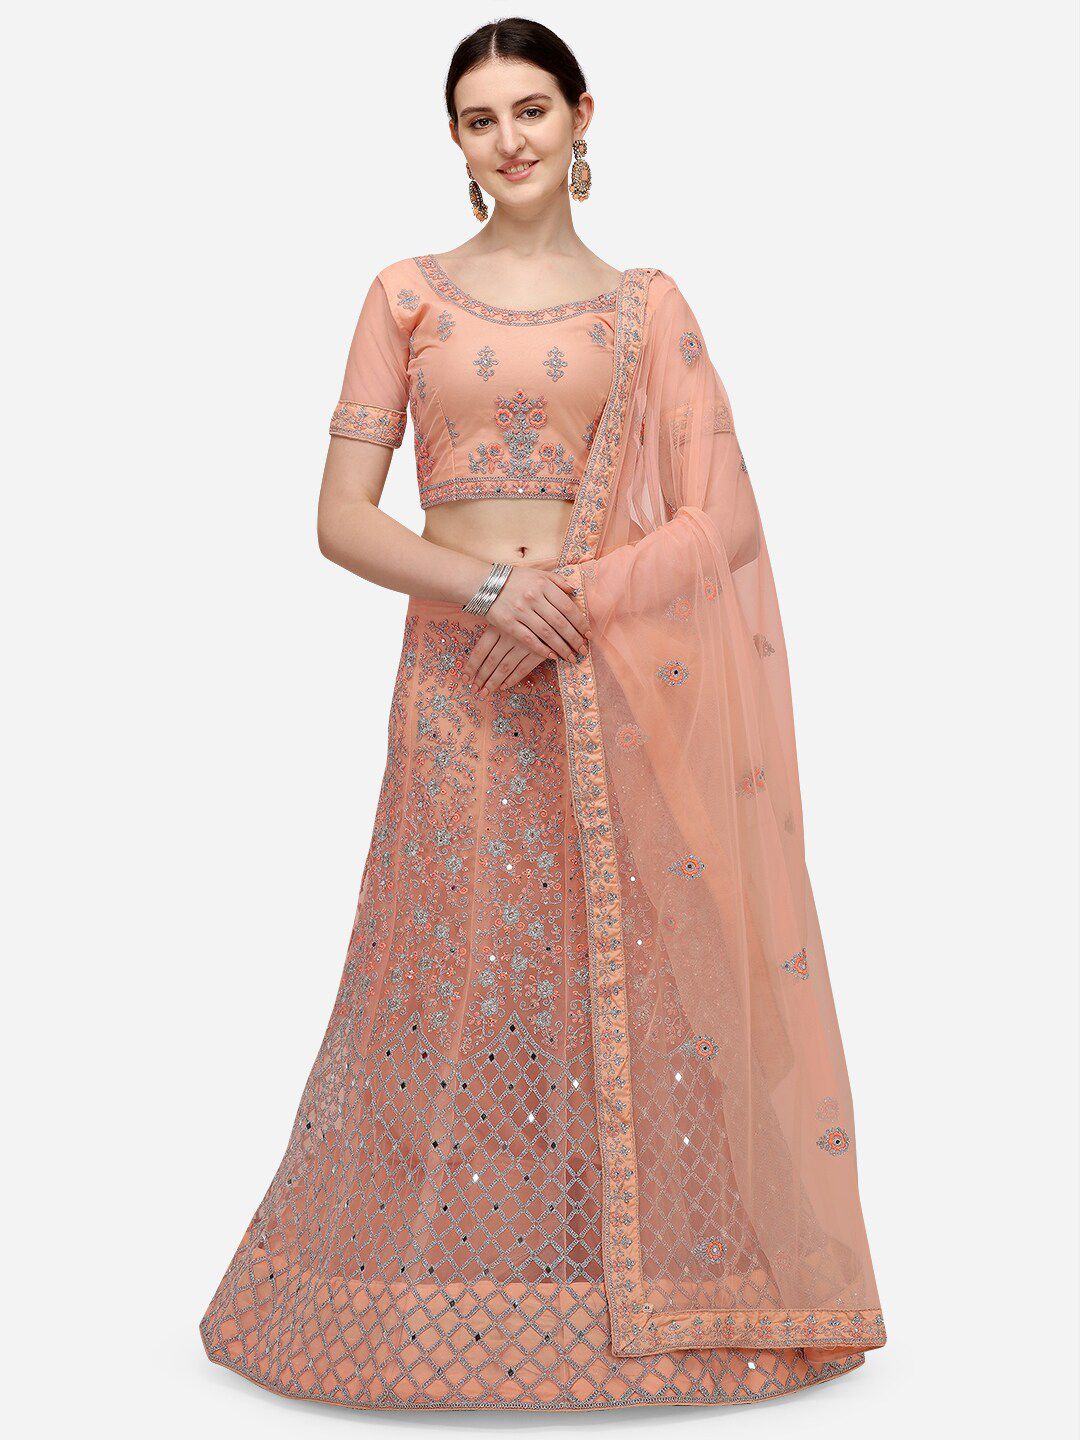 VRSALES Peach-Coloured & Silver-Toned Unstitched Lehenga & Blouse With Dupatta Price in India